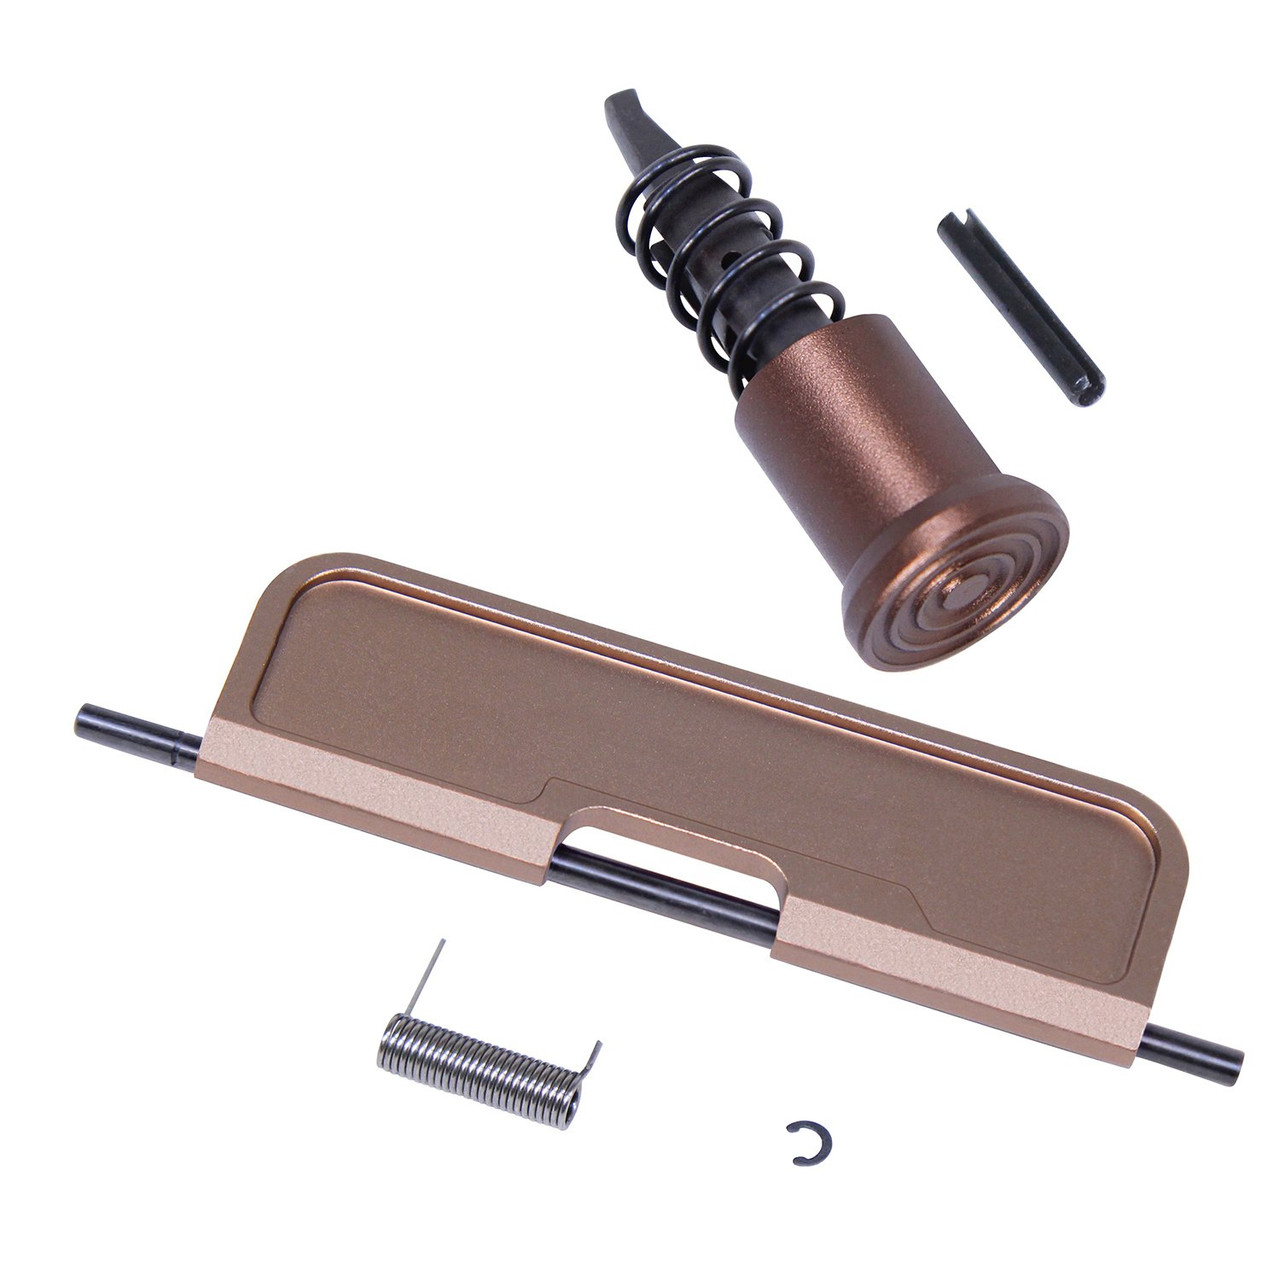 Guntec USA 223UPPER-CKIT-G3-BRZ AR-15 Upper Completion Kit With Gen 3 Dust Cover (Anodized Bronze)